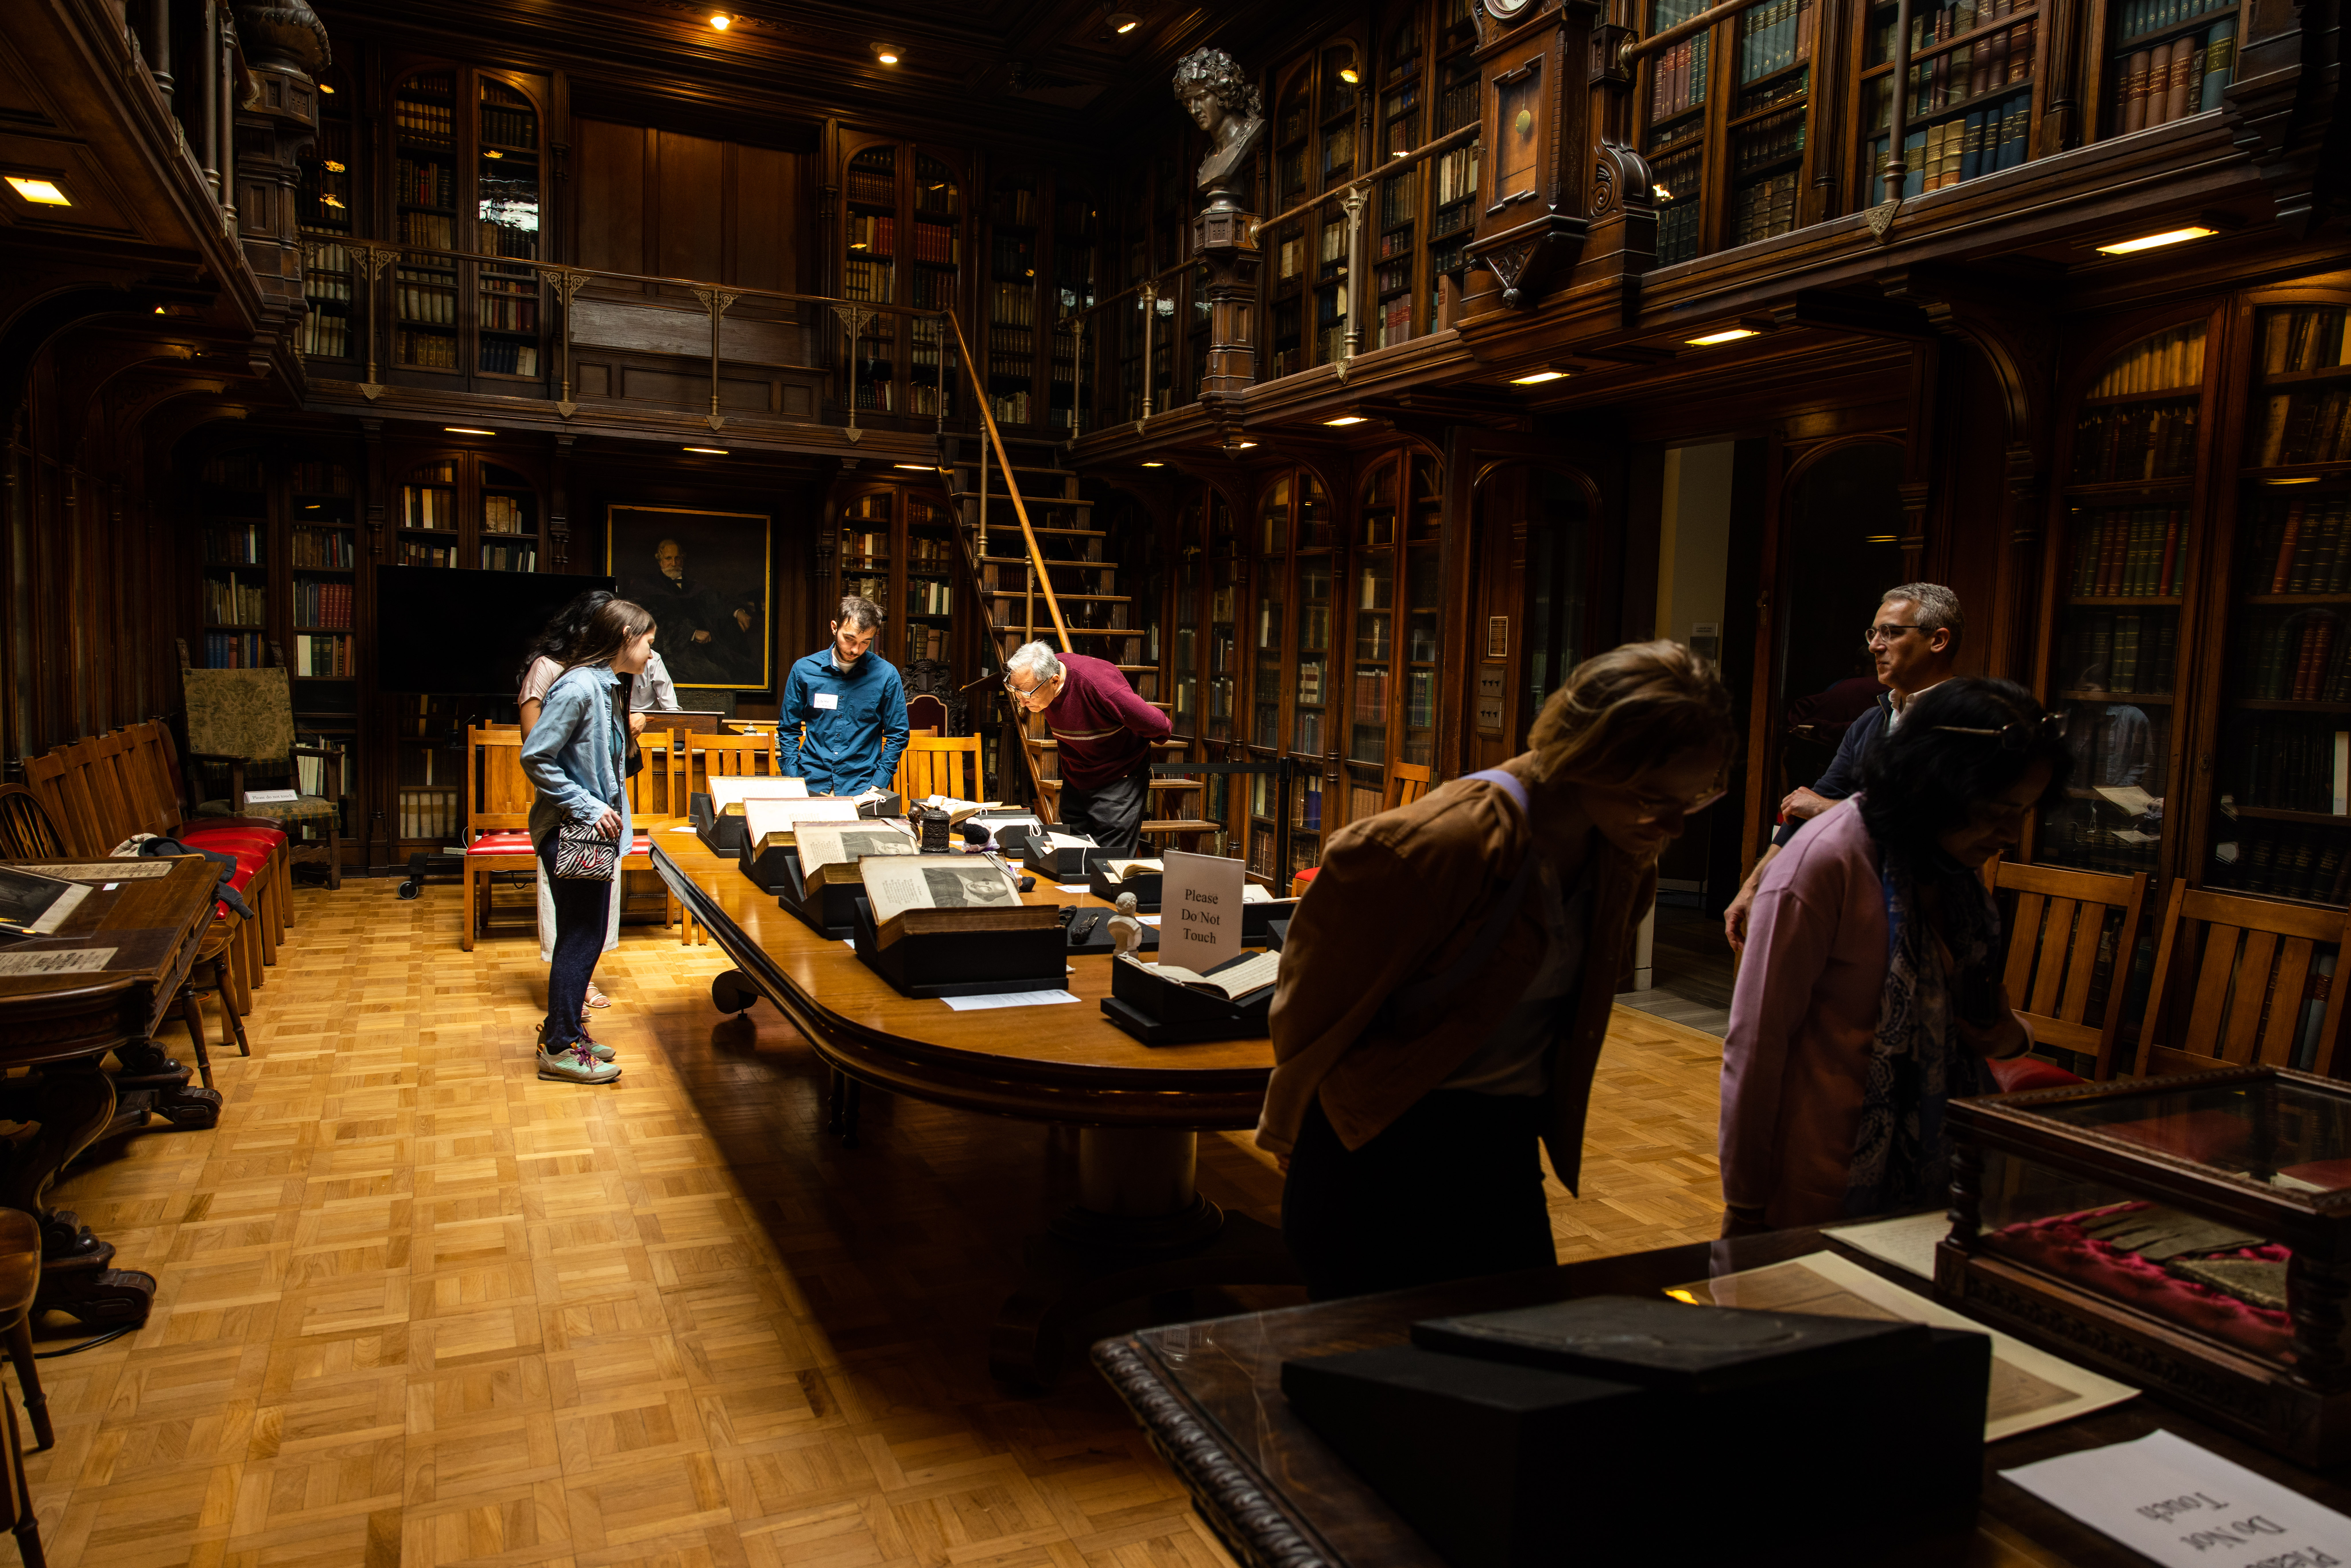 about six people in a historic library looking at books on a long table